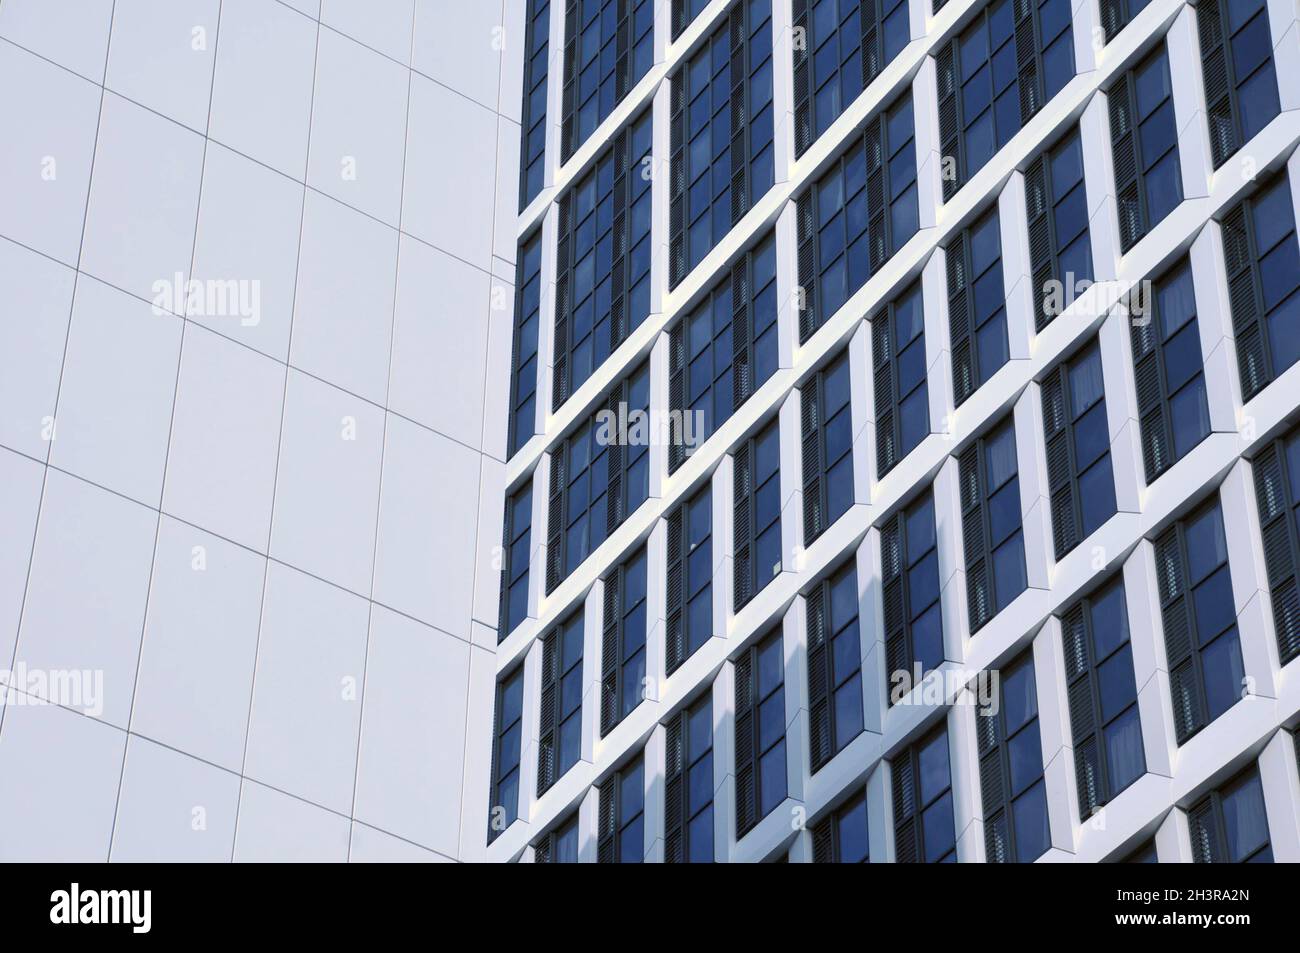 Close up detail of tall high rose modern apartment buildings with white cladding and dark windows Stock Photo